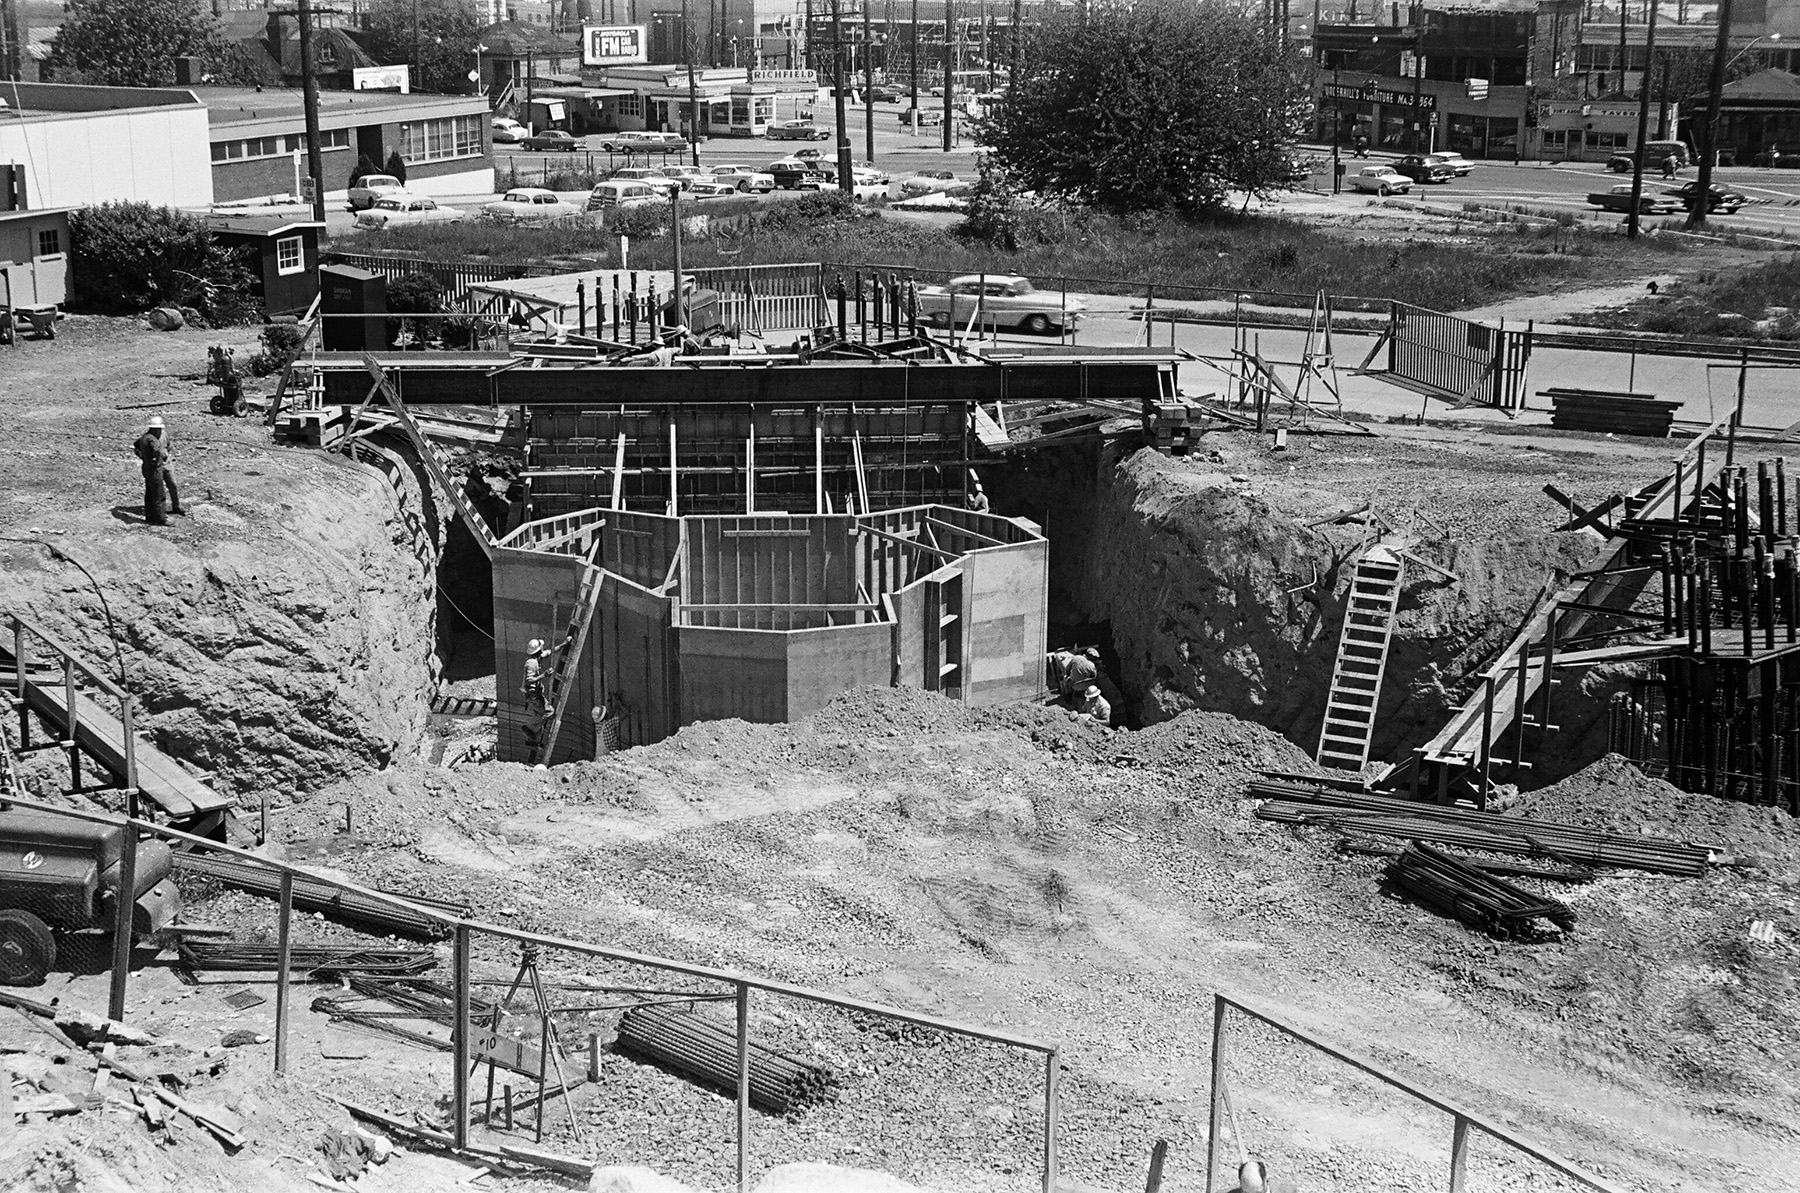 The photograph shows a large hole in the ground. There is the beginning of a y-shaped steel structure being built. 